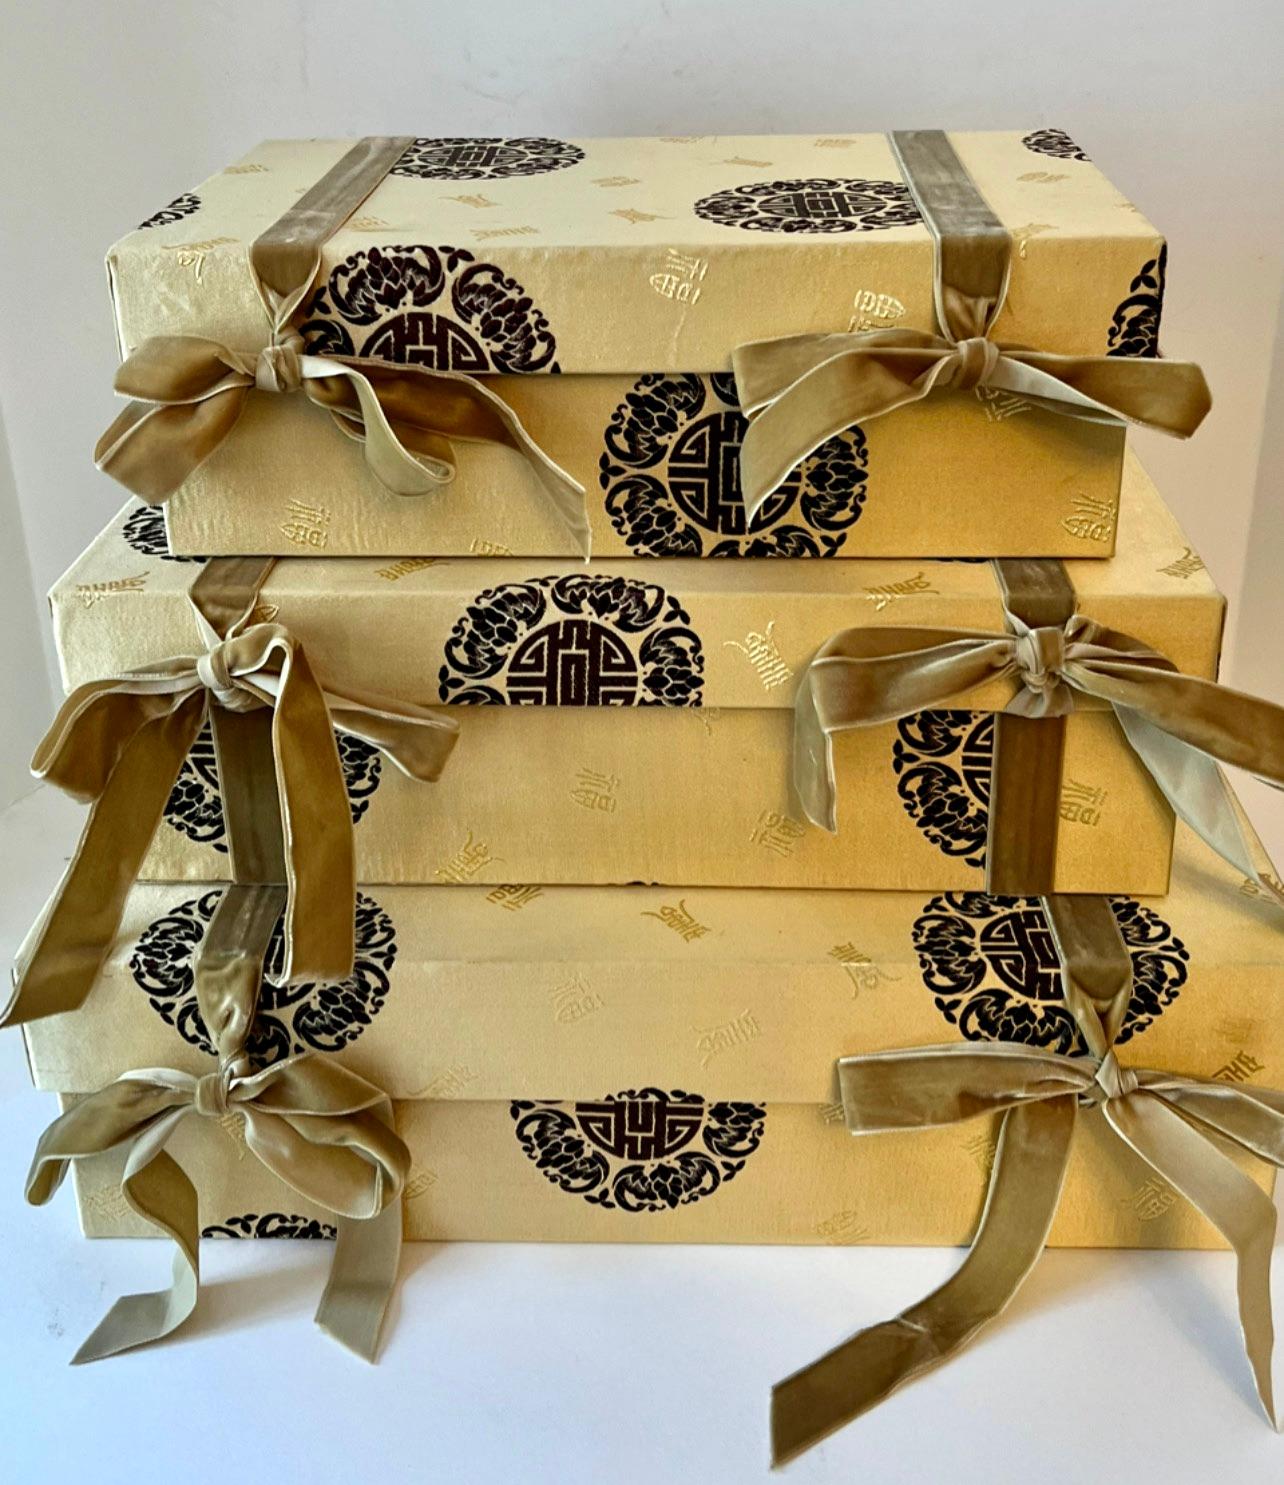 Set of three nesting boxes in Asian Chinese Fabric with symbols for good luck and double happiness.  The boxes fit inside each other as well as have velvet ribbons that tie into a bow.

The boxes are wonderfully decorative and can also store papers,